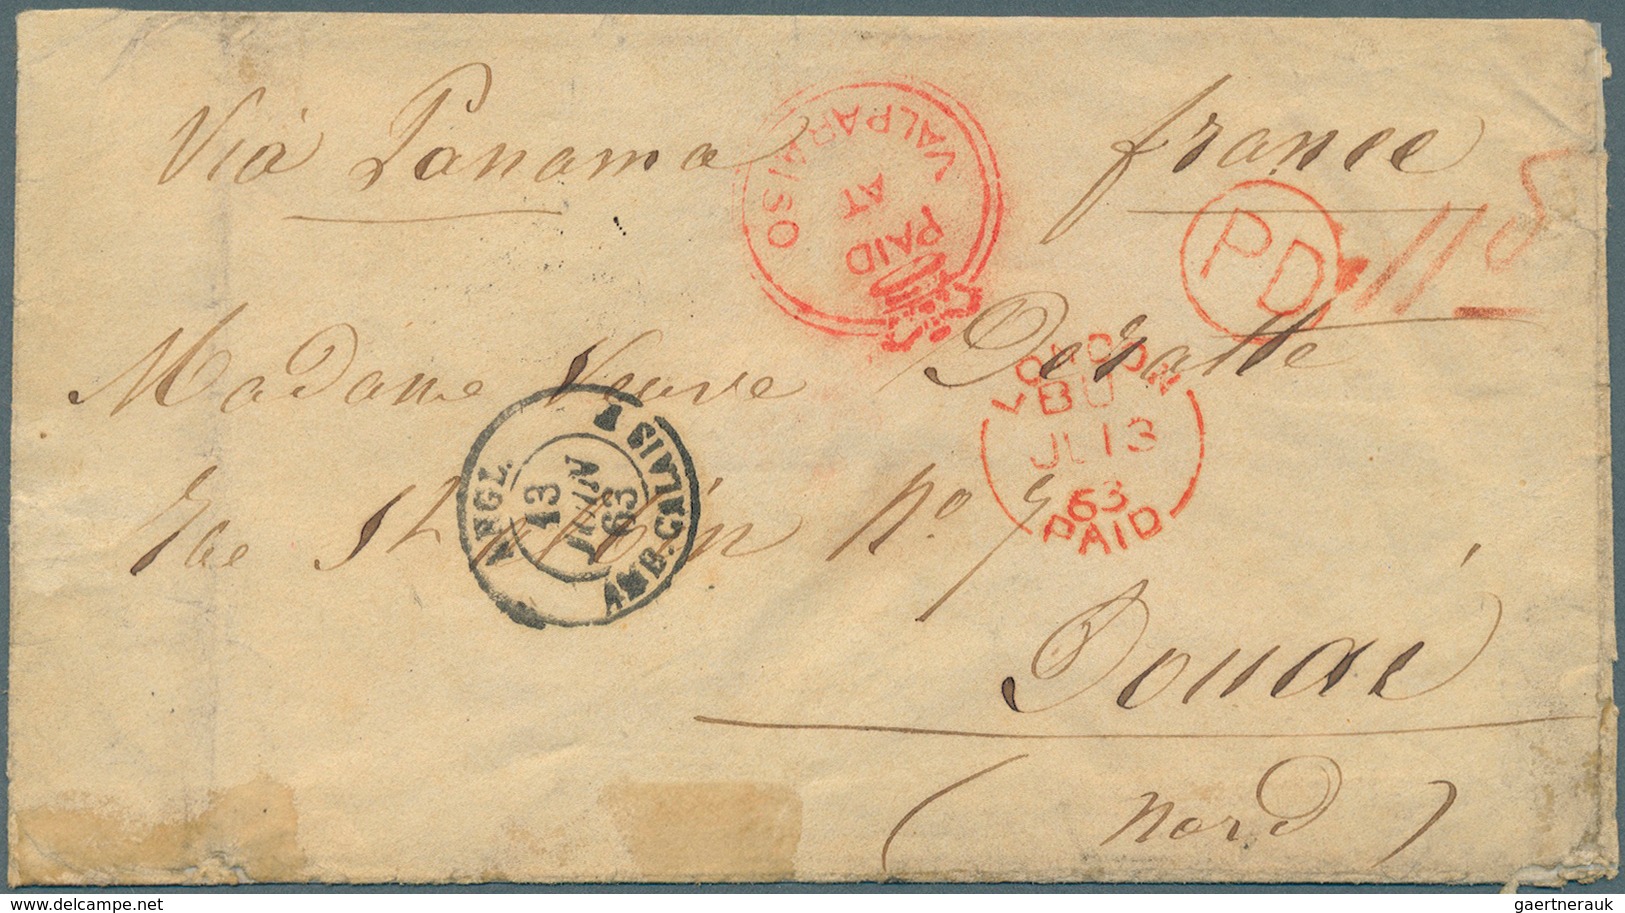 Chile: 1863, Stampless Folded Envelope Tied By Red Crown Mark "PAID AT VALPARAISO", Ms. "VIA PANAMA" - Chile